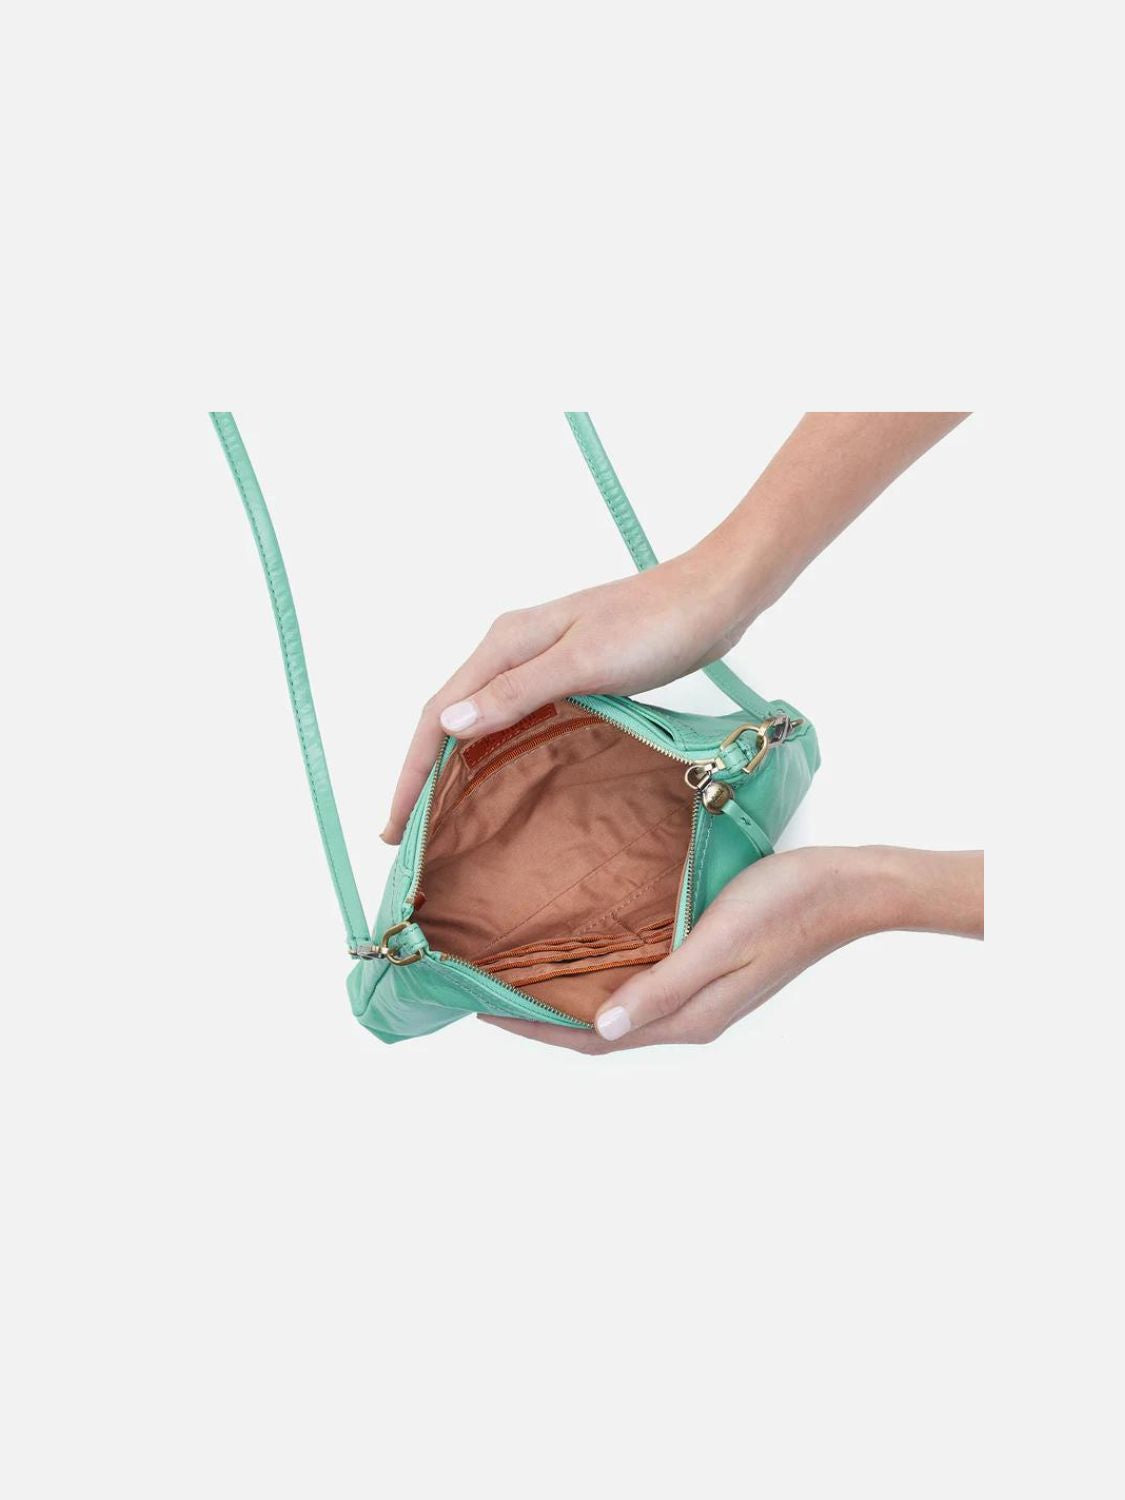 hobo darcy crossbody polished leather in seaglass-inside